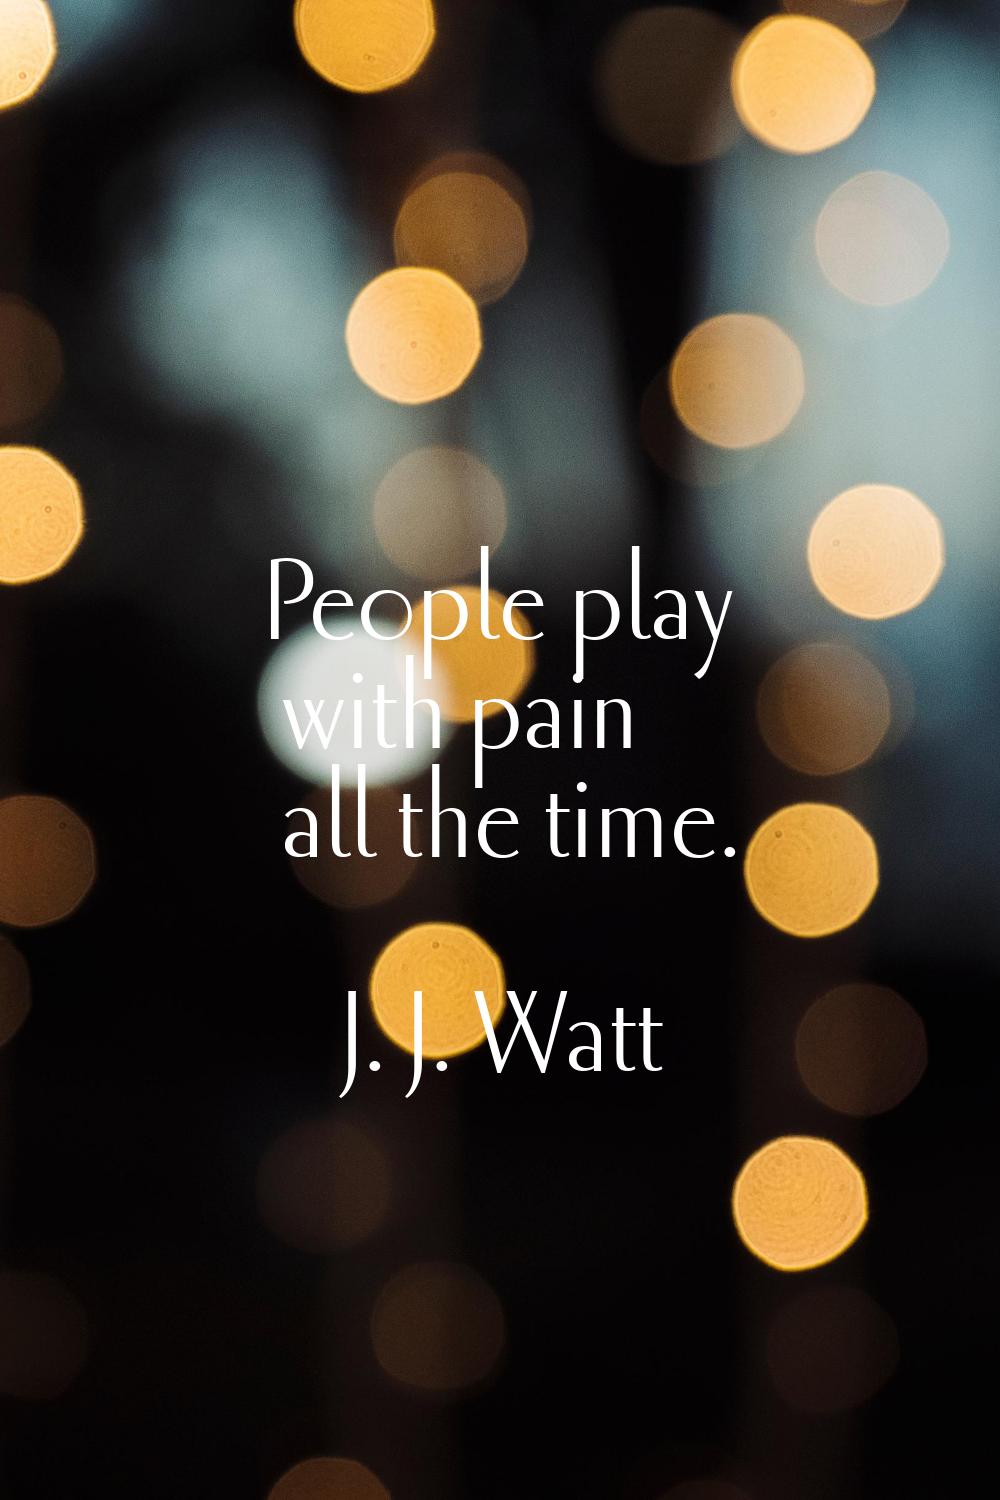 People play with pain all the time.